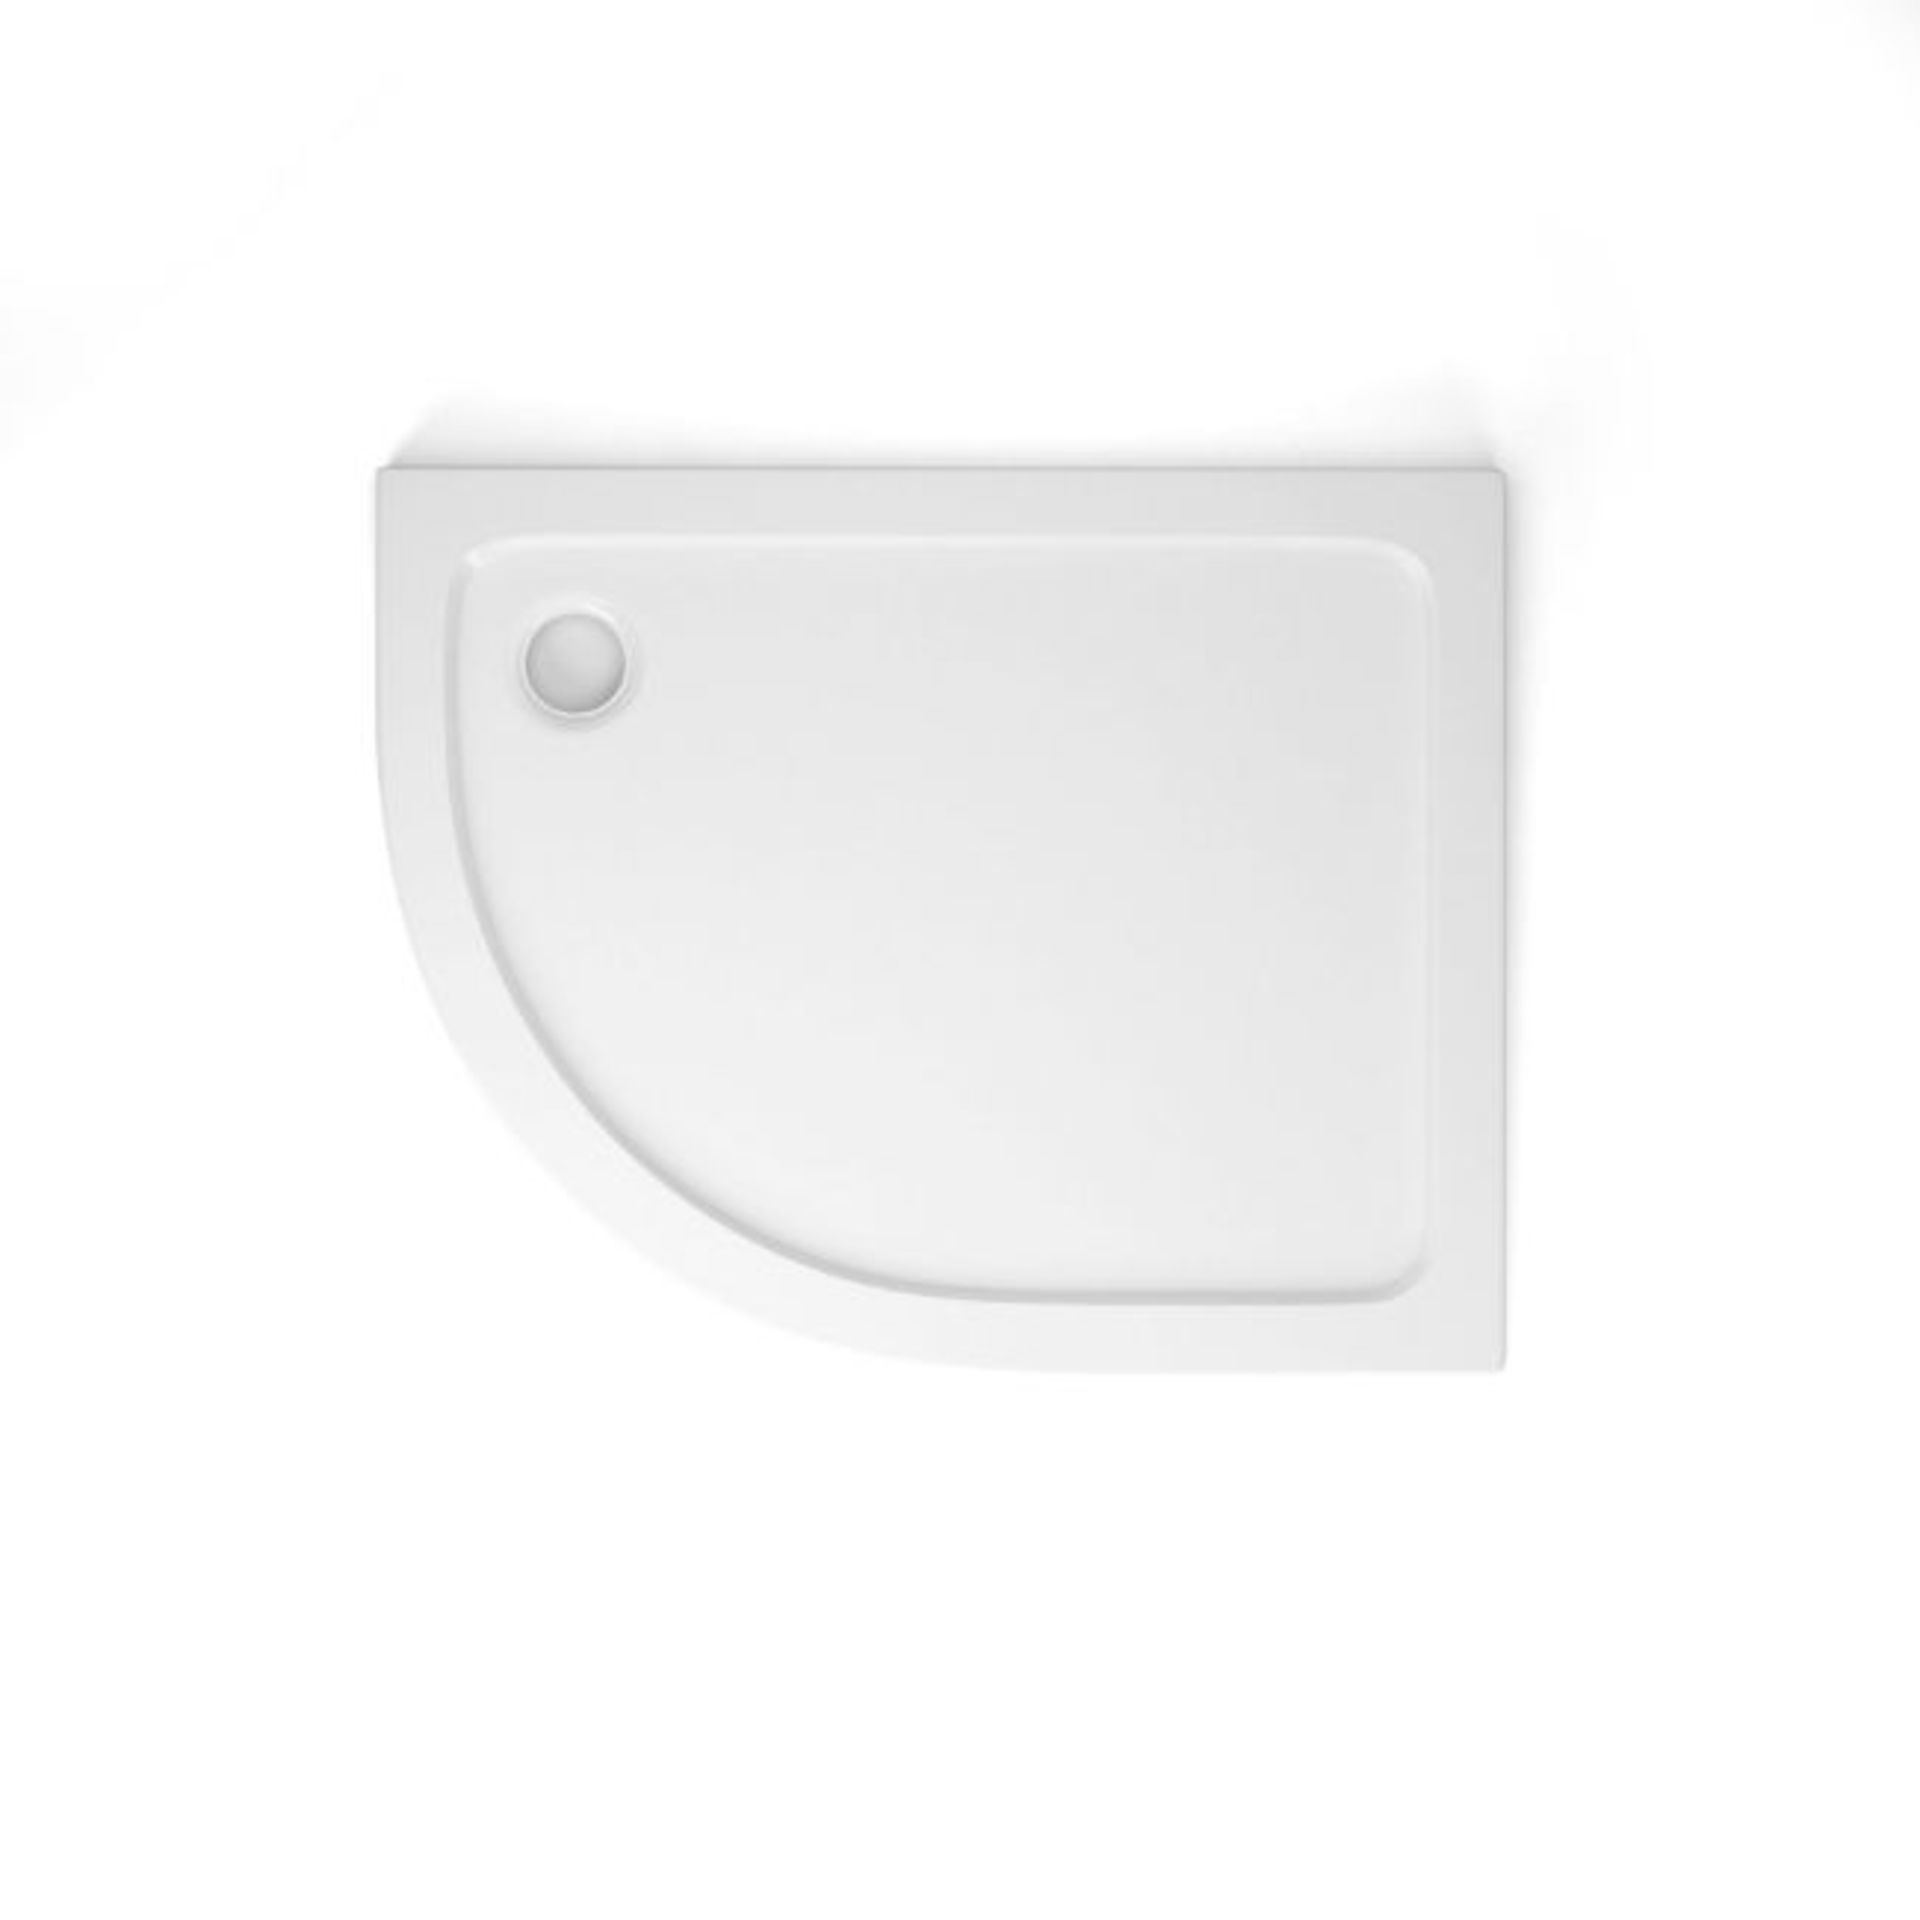 New (NY19) 1000x800mm Offset Quadrant Ultra Slim Stone Shower Tray - Left. Constructed from...